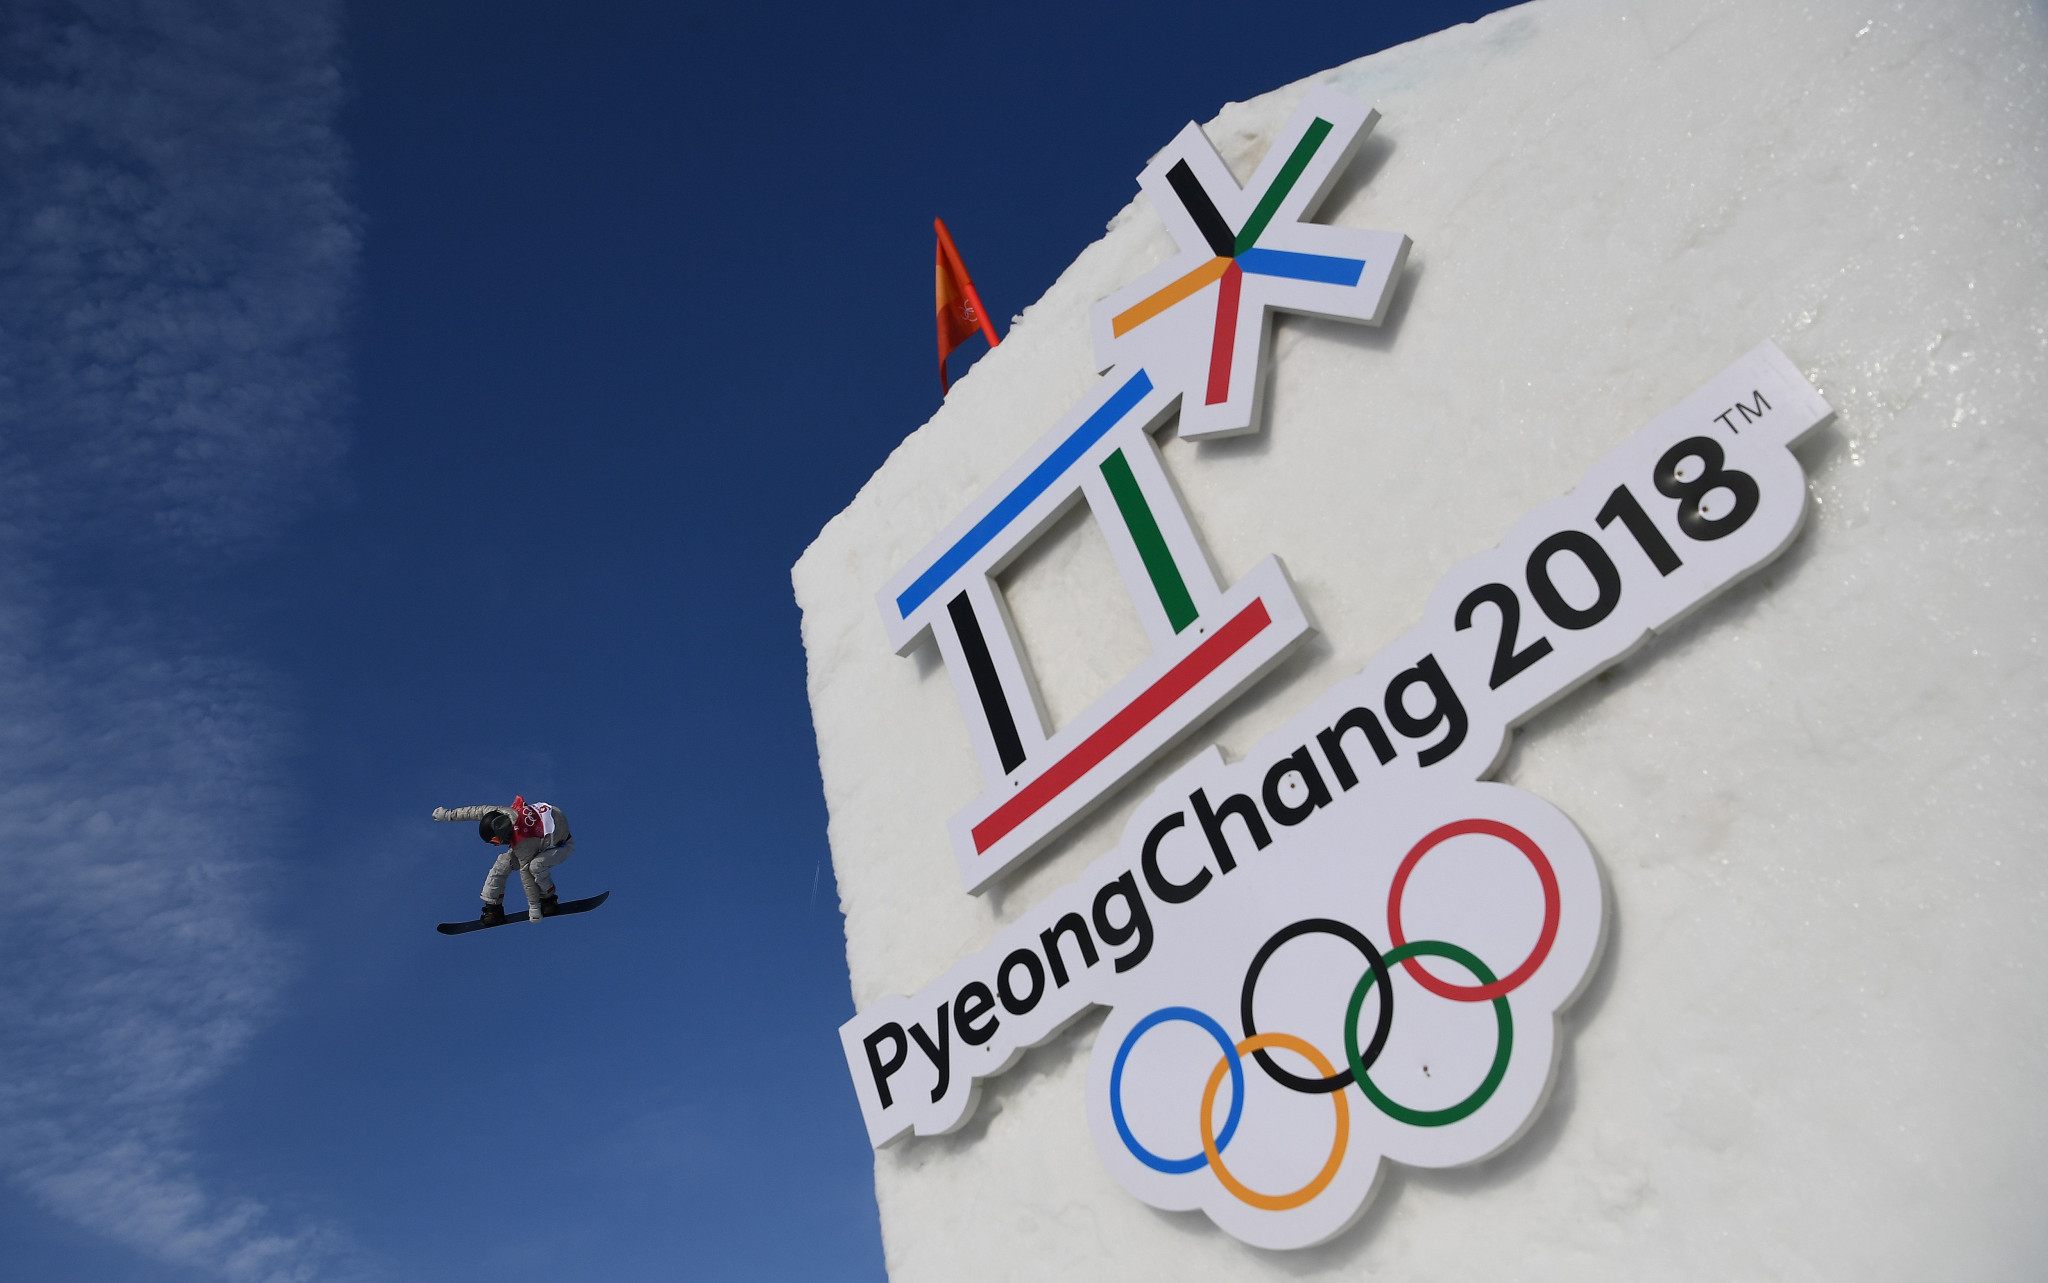 Pyeongchang emerges as potential host for future Winter Universiade 